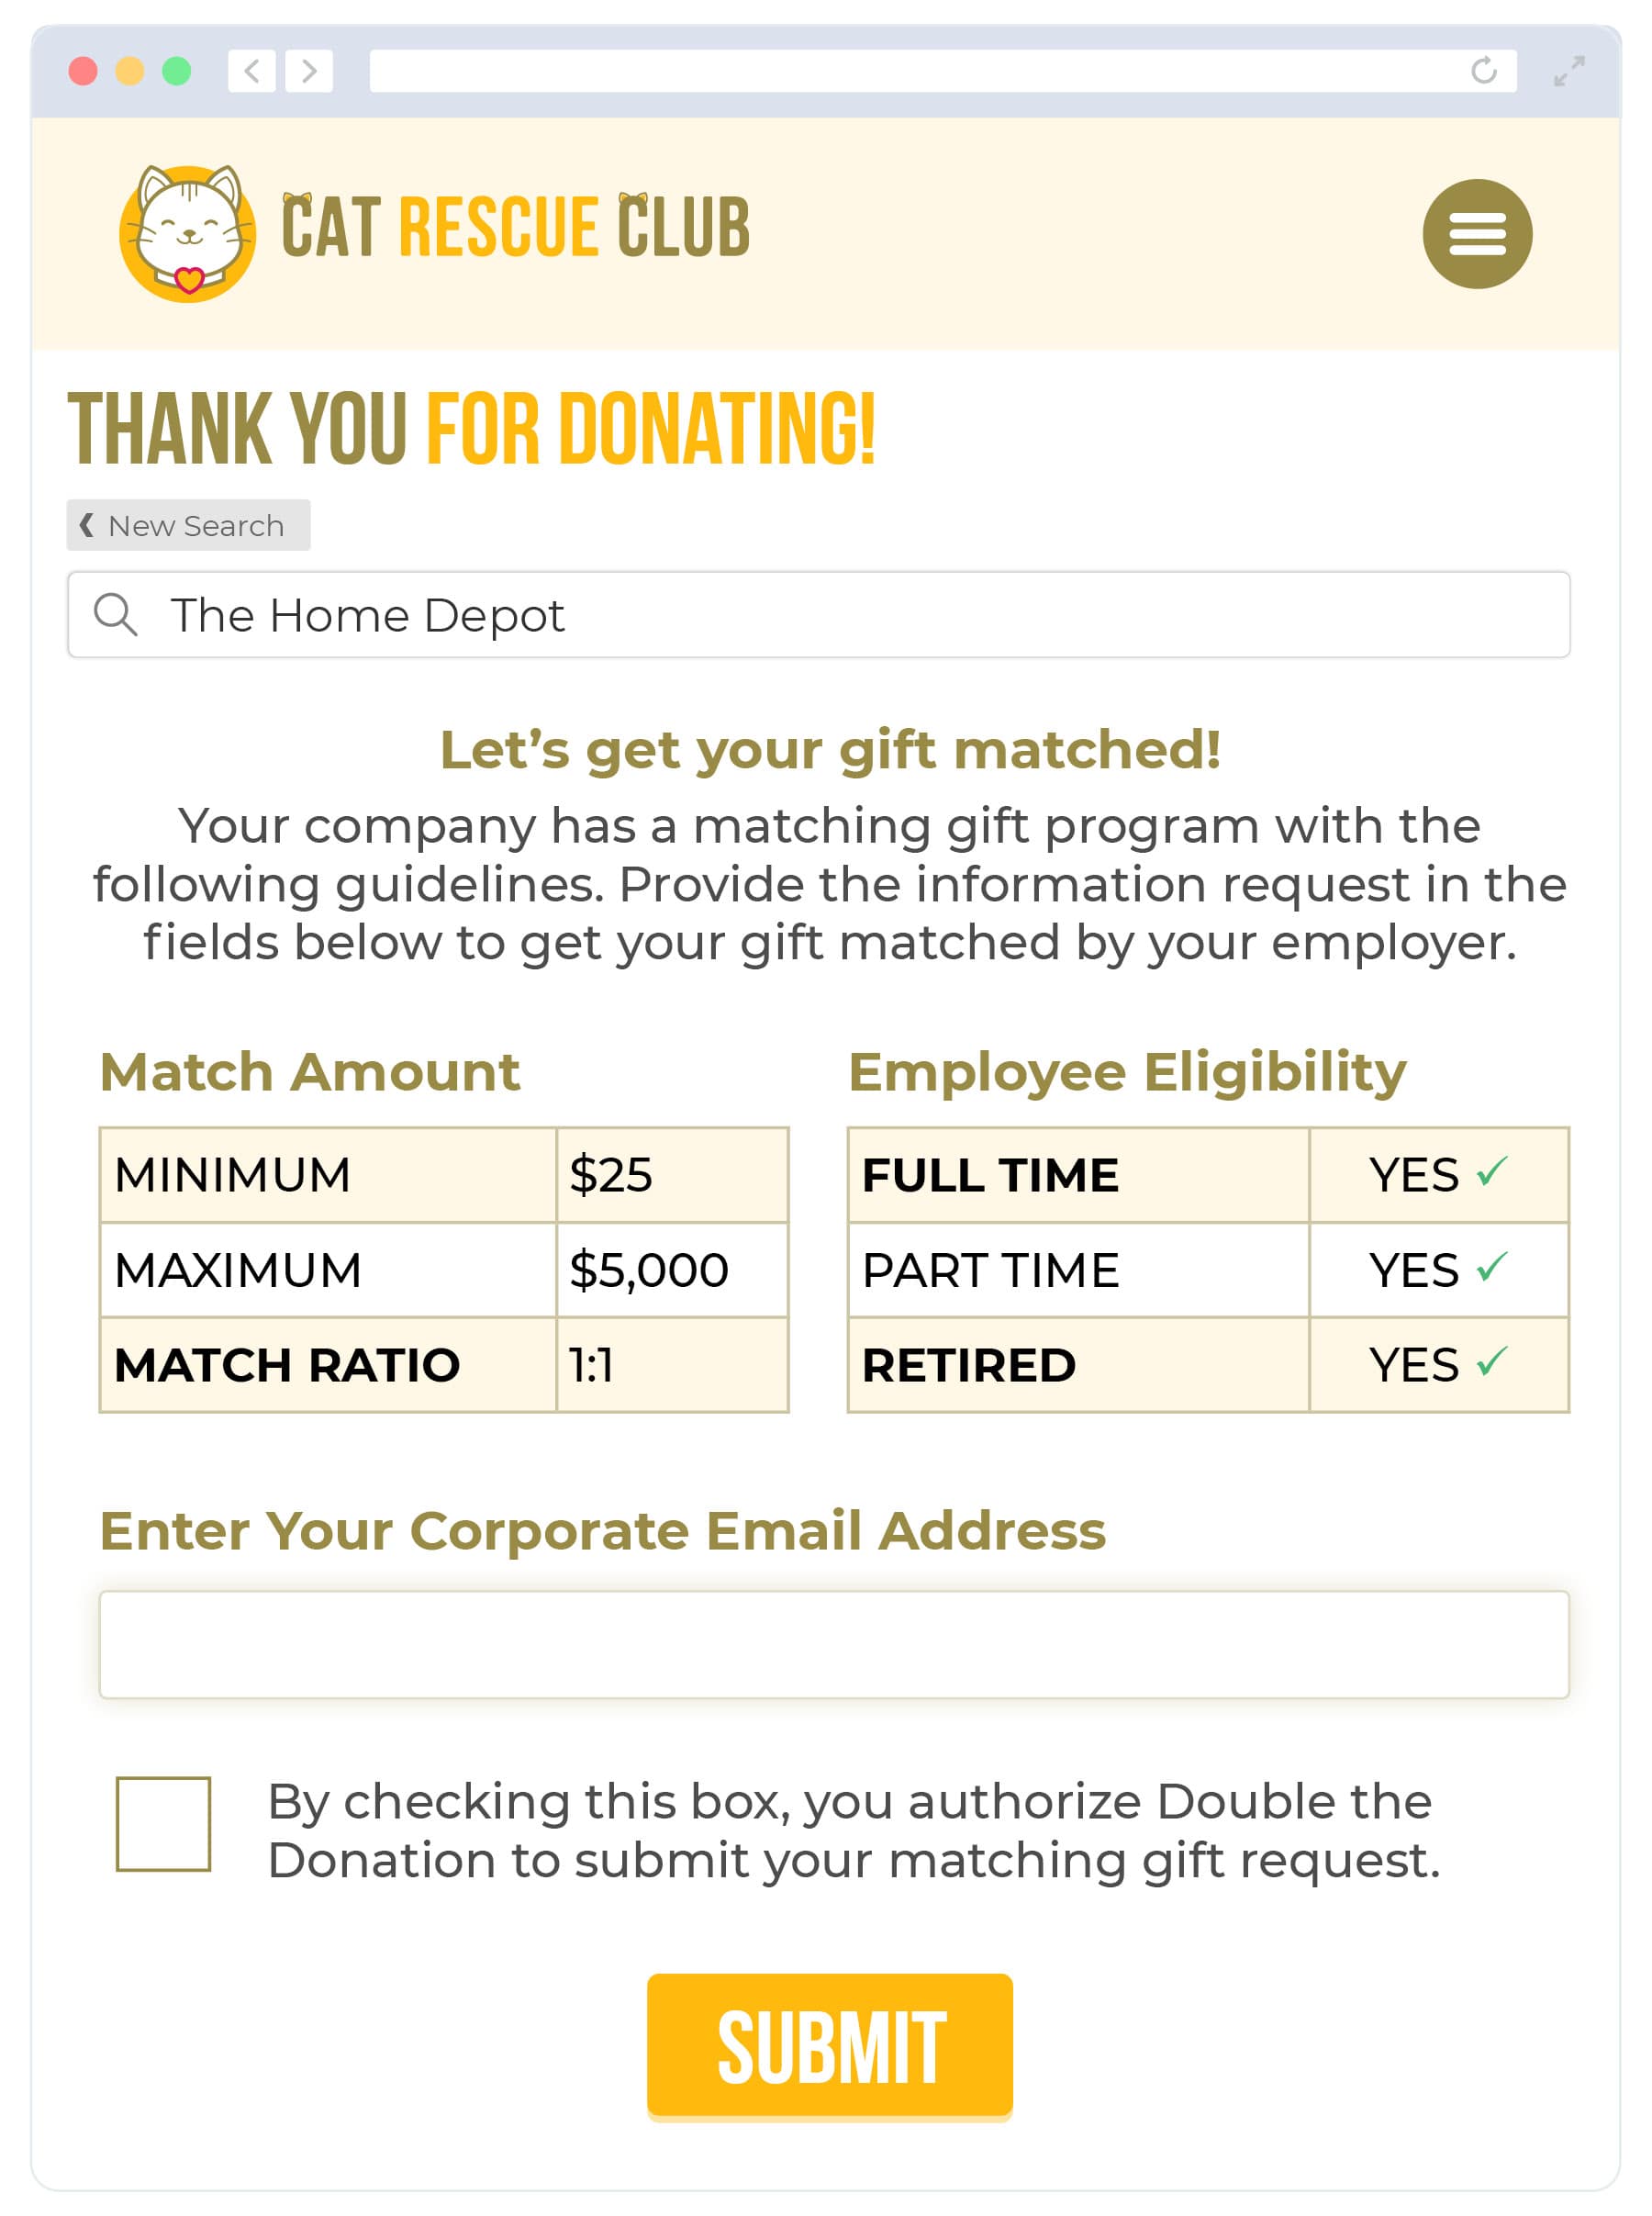 Donors can complete the matching gift request process from the confirmation page when their employer uses Double the Donation's standard matching gift form